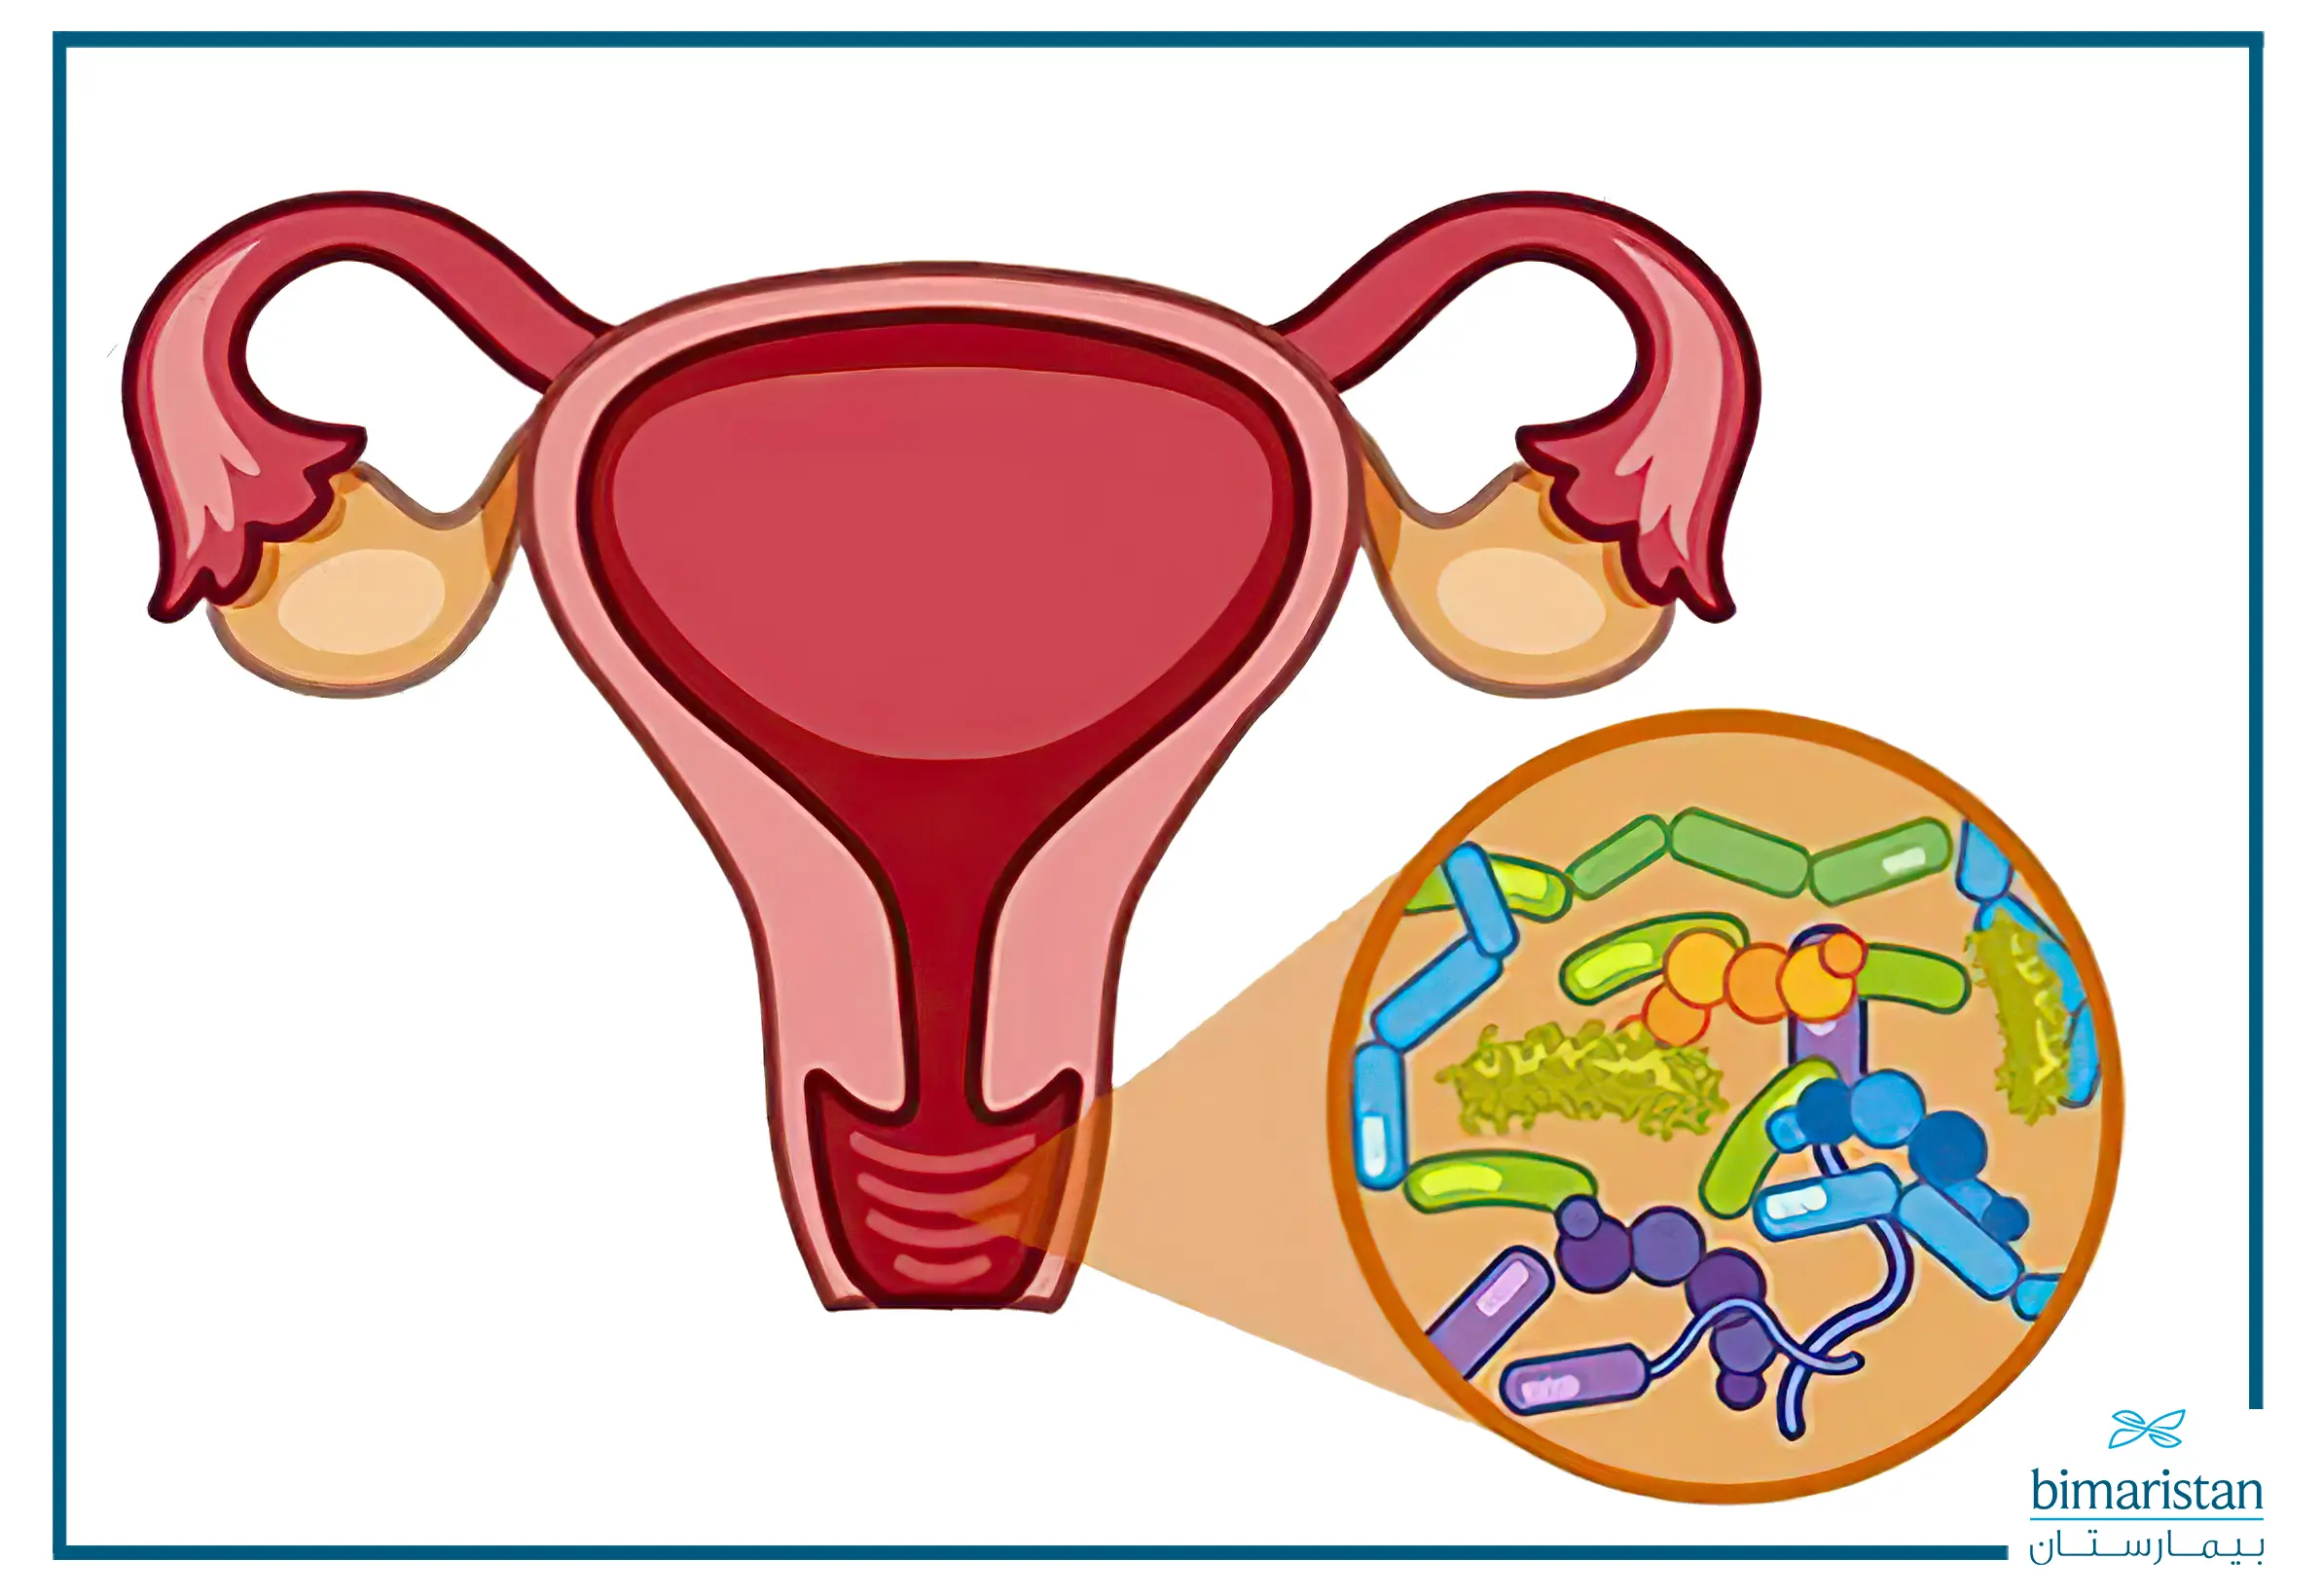 a picture illustrating the presence of normal vaginal microorganisms, known as vaginal flora